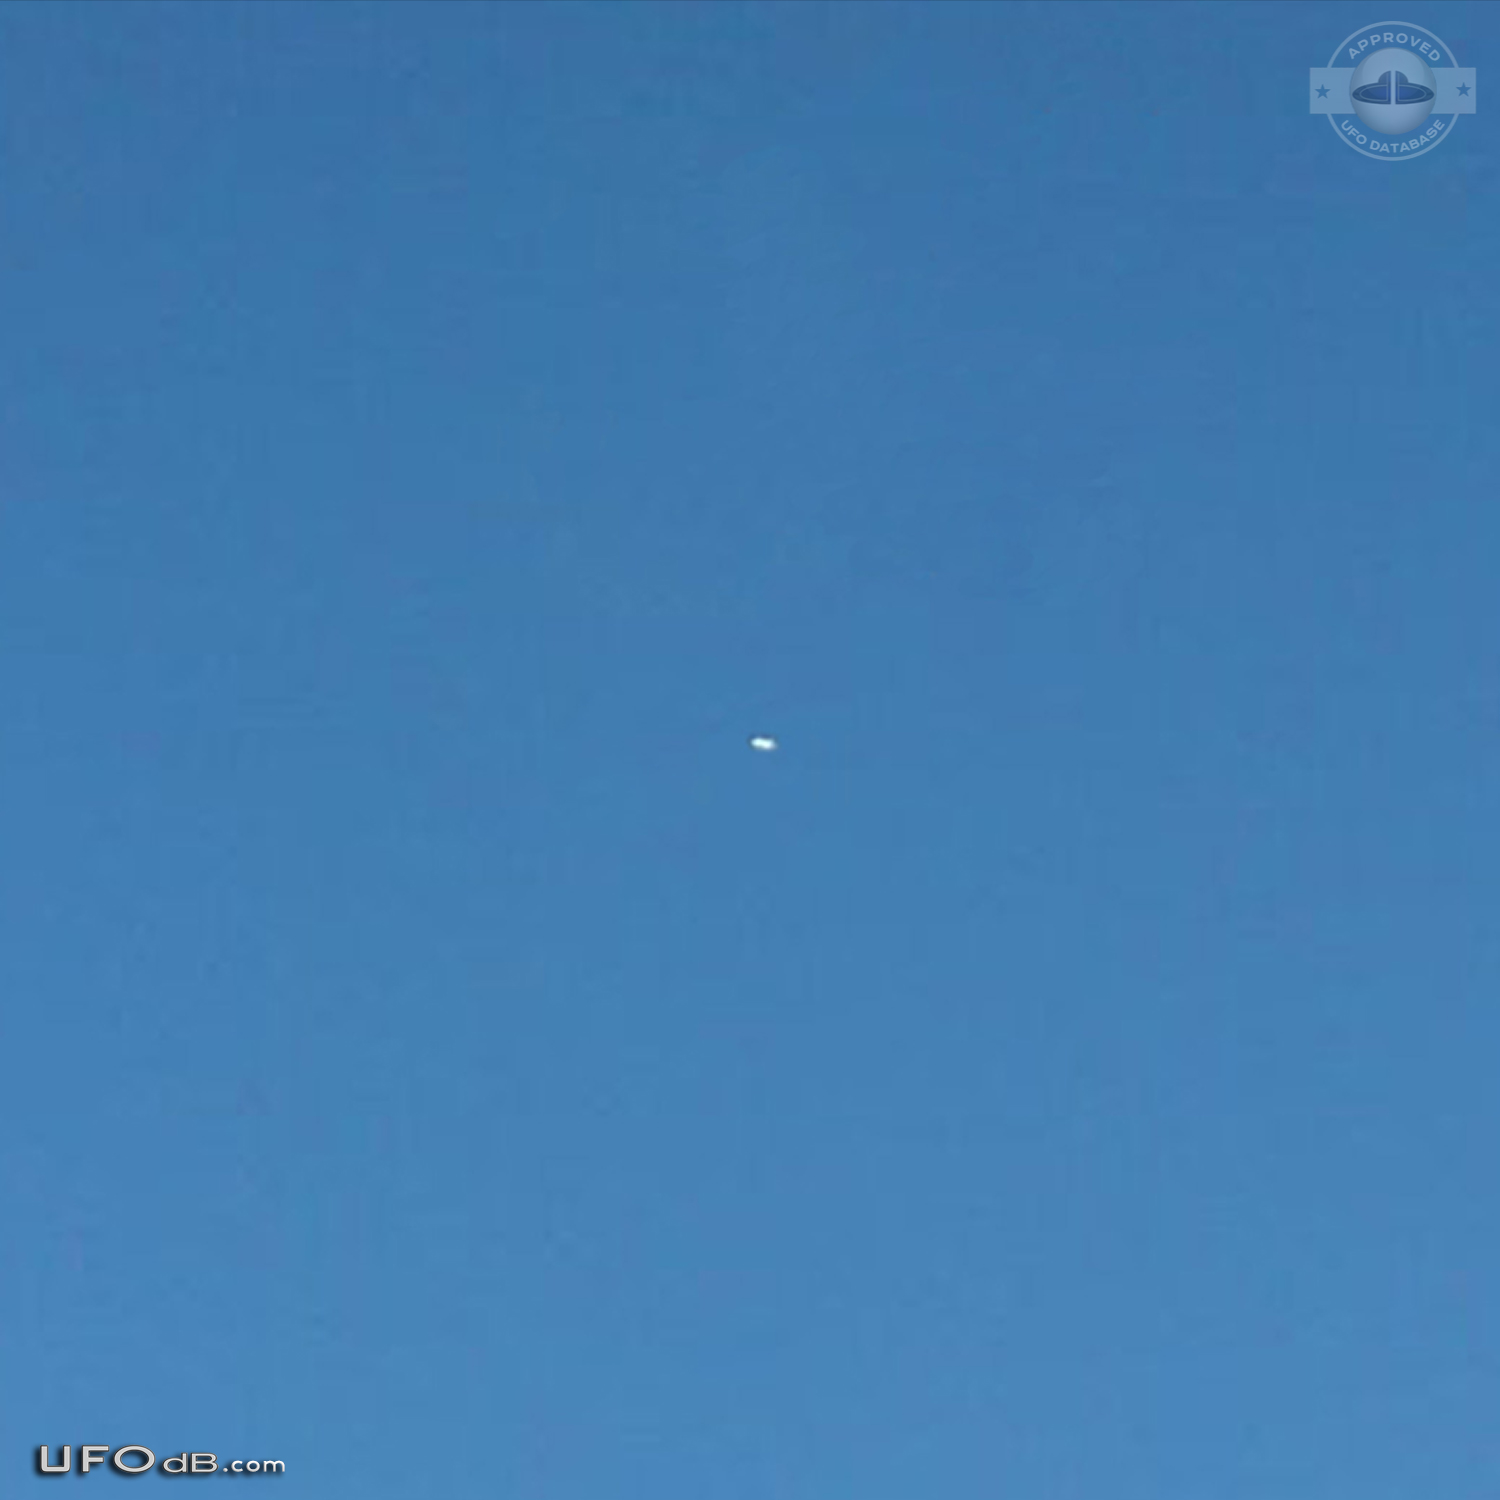 Cylindrical Saucer UFO caught on picture over Oland, Sweden in 2008 UFO Picture #453-2